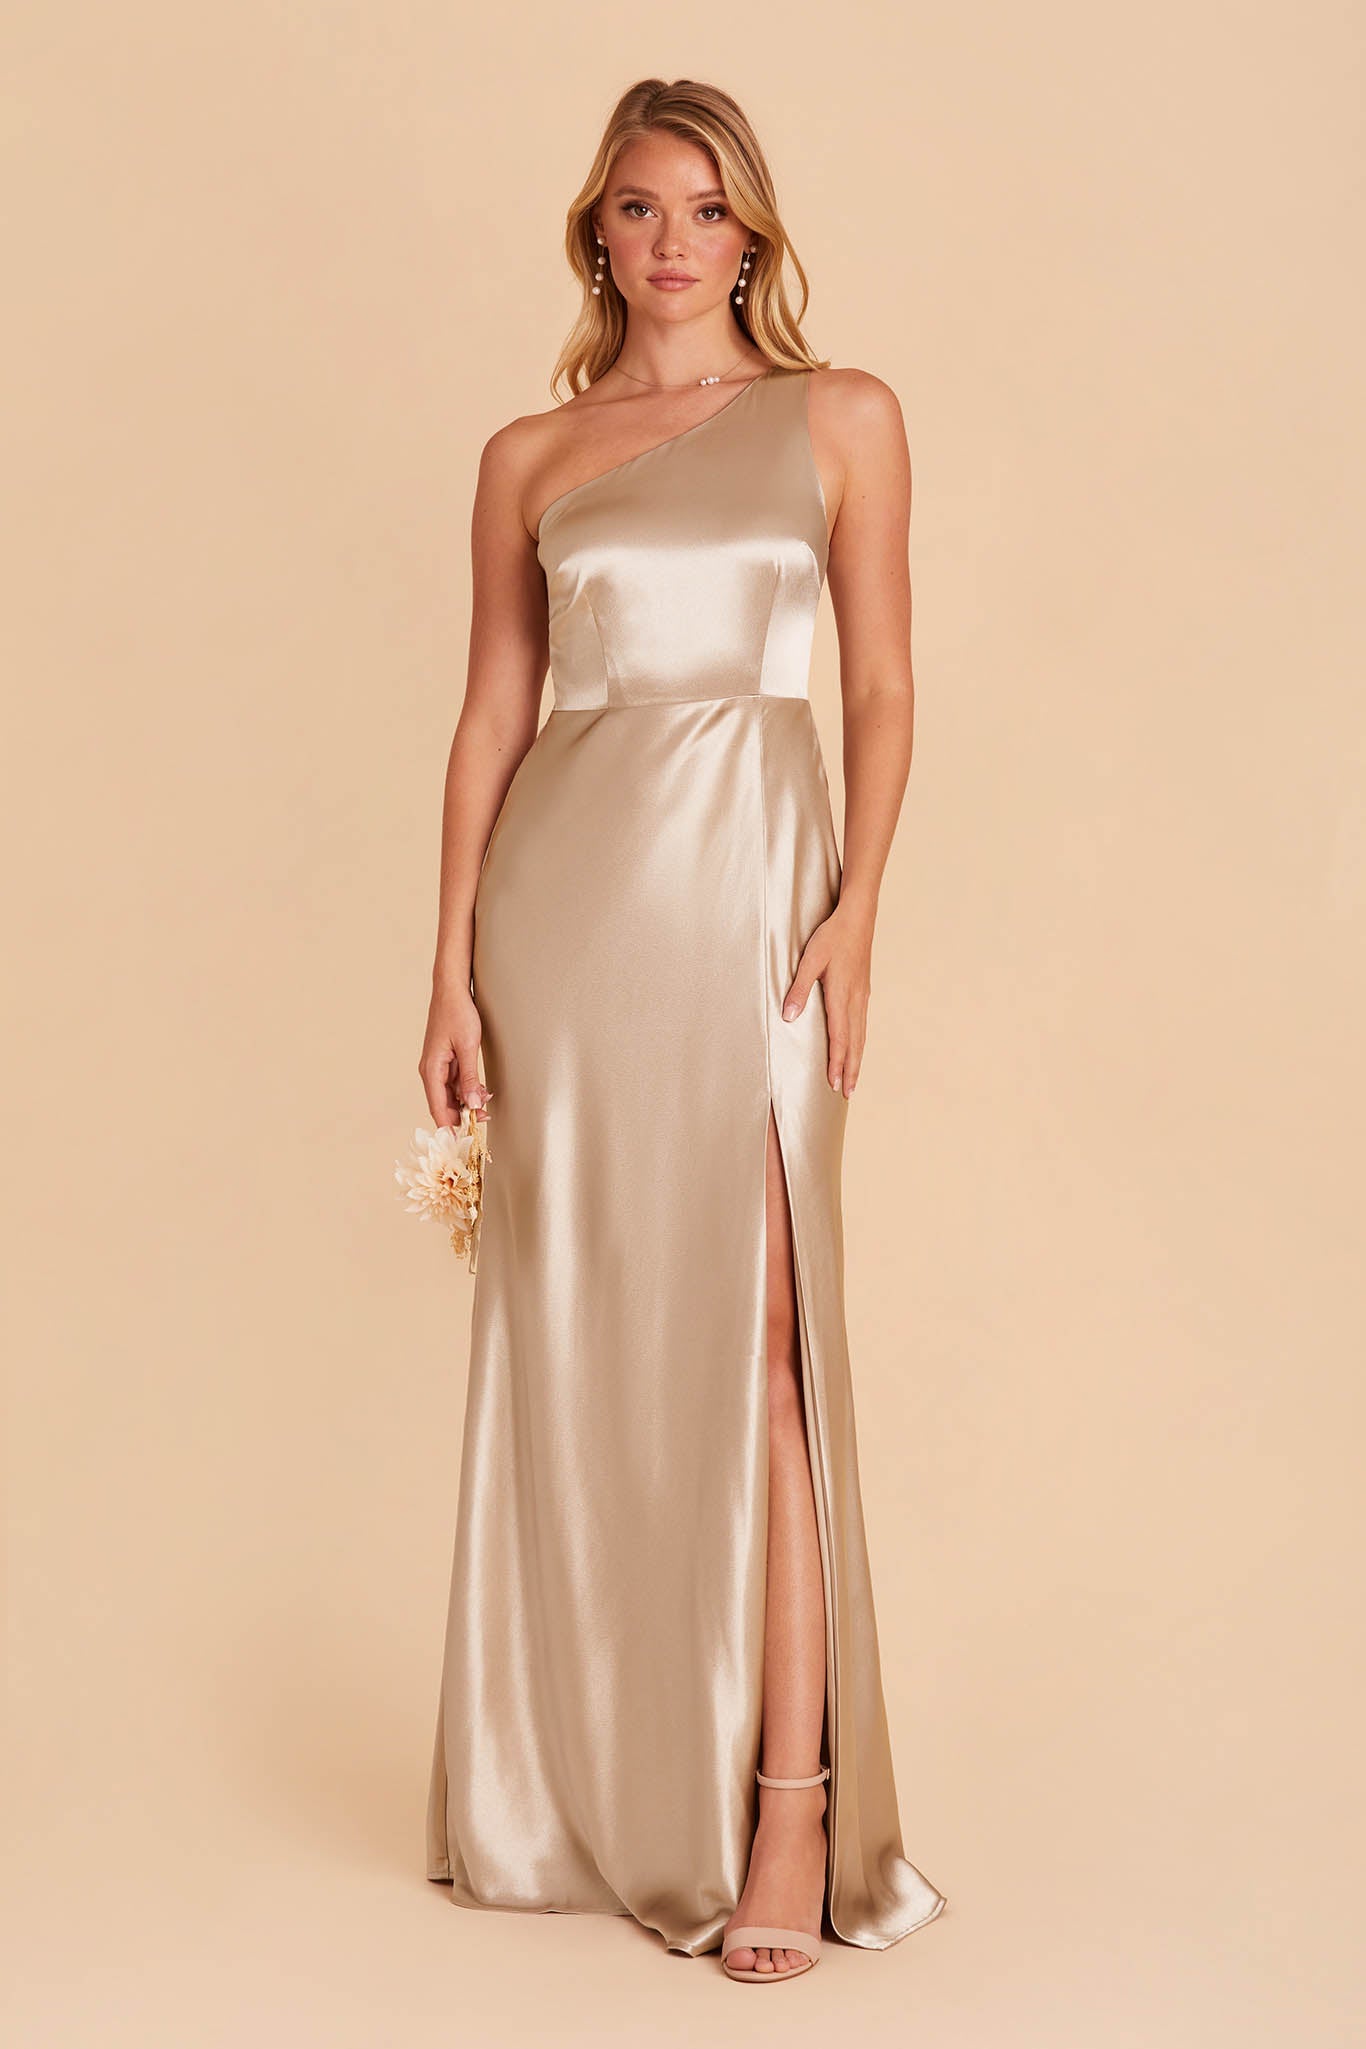 Front view of the Kira Dress in neutral champagne satin with a slit shows a slender model with a light skin tone wearing the Brookhaven Trio Pearl Necklace with Lowell Pearl Drop Earrings. The mid-thigh slit reveals their leg and the Natalie Chunky Heel shoes in nude blush.